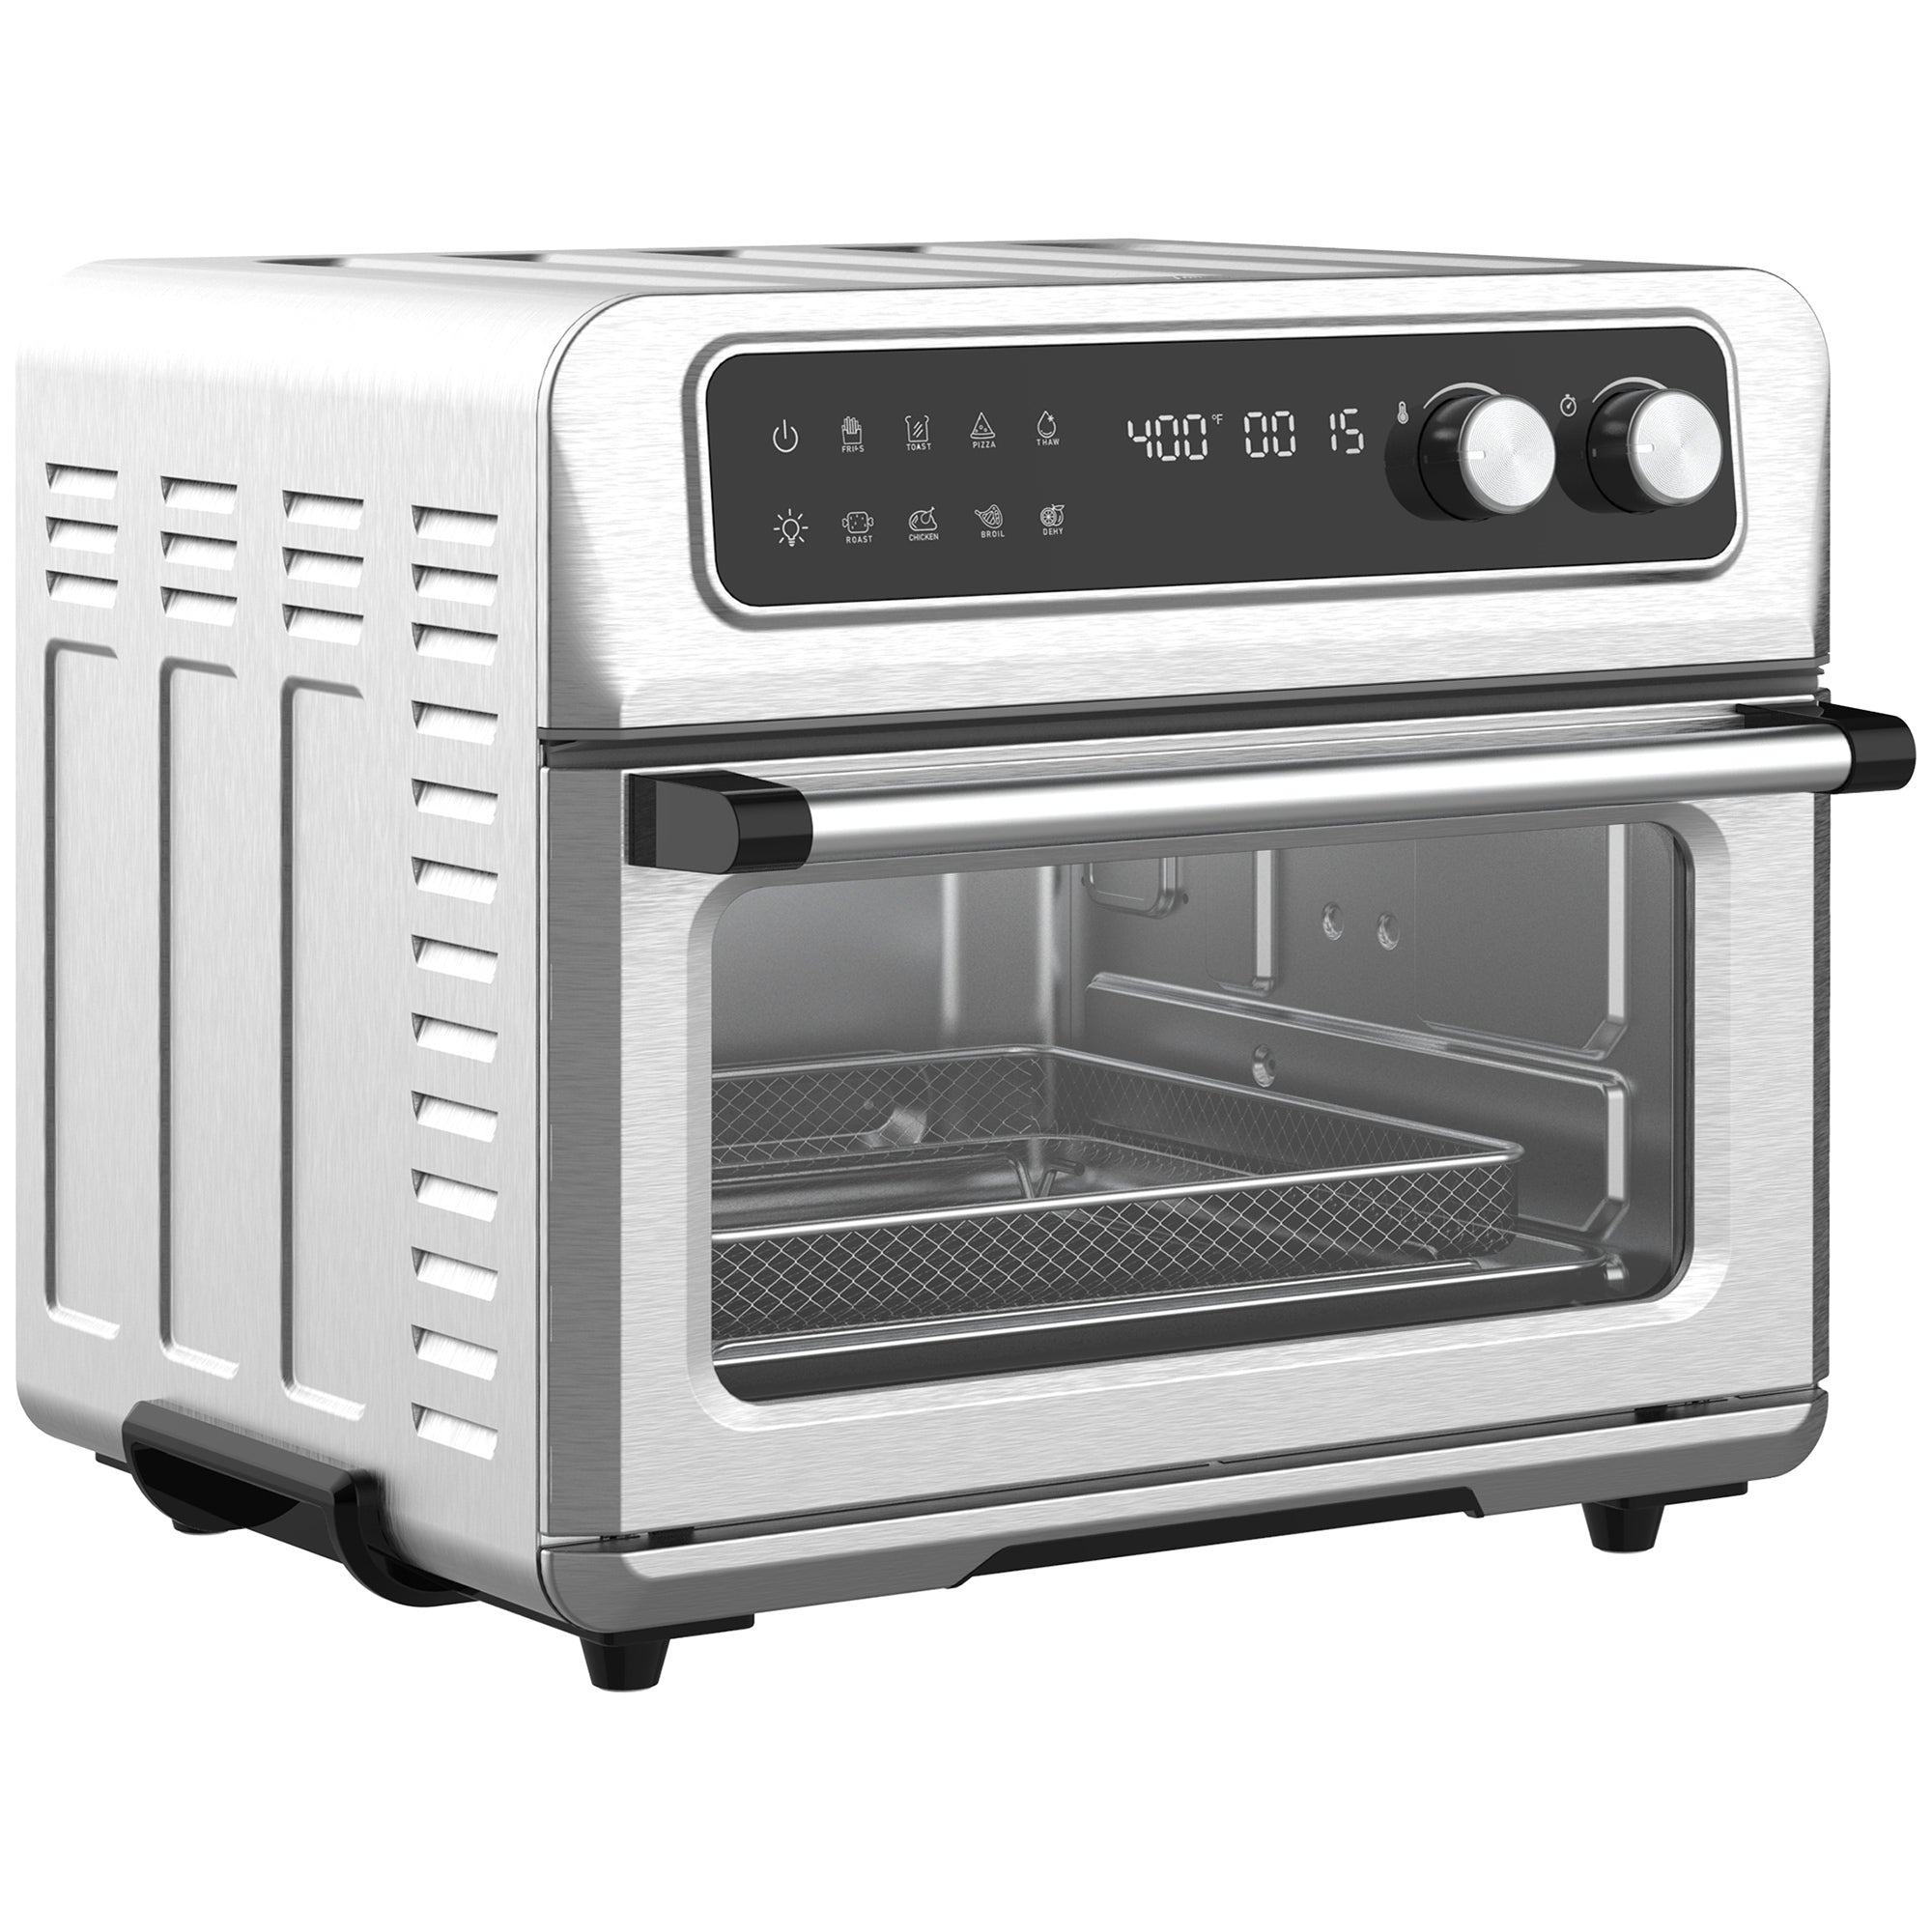 Air-Fryer-Toaster-Oven,-21QT-8-In-1-Convection-Oven-Countertop,-Broil,-Toast,-Dehydrator,-Thaw-and-Air-Fry,--Accessories-Included,-1800W,-Stainless-Steel-Finish-kitchen-appliance